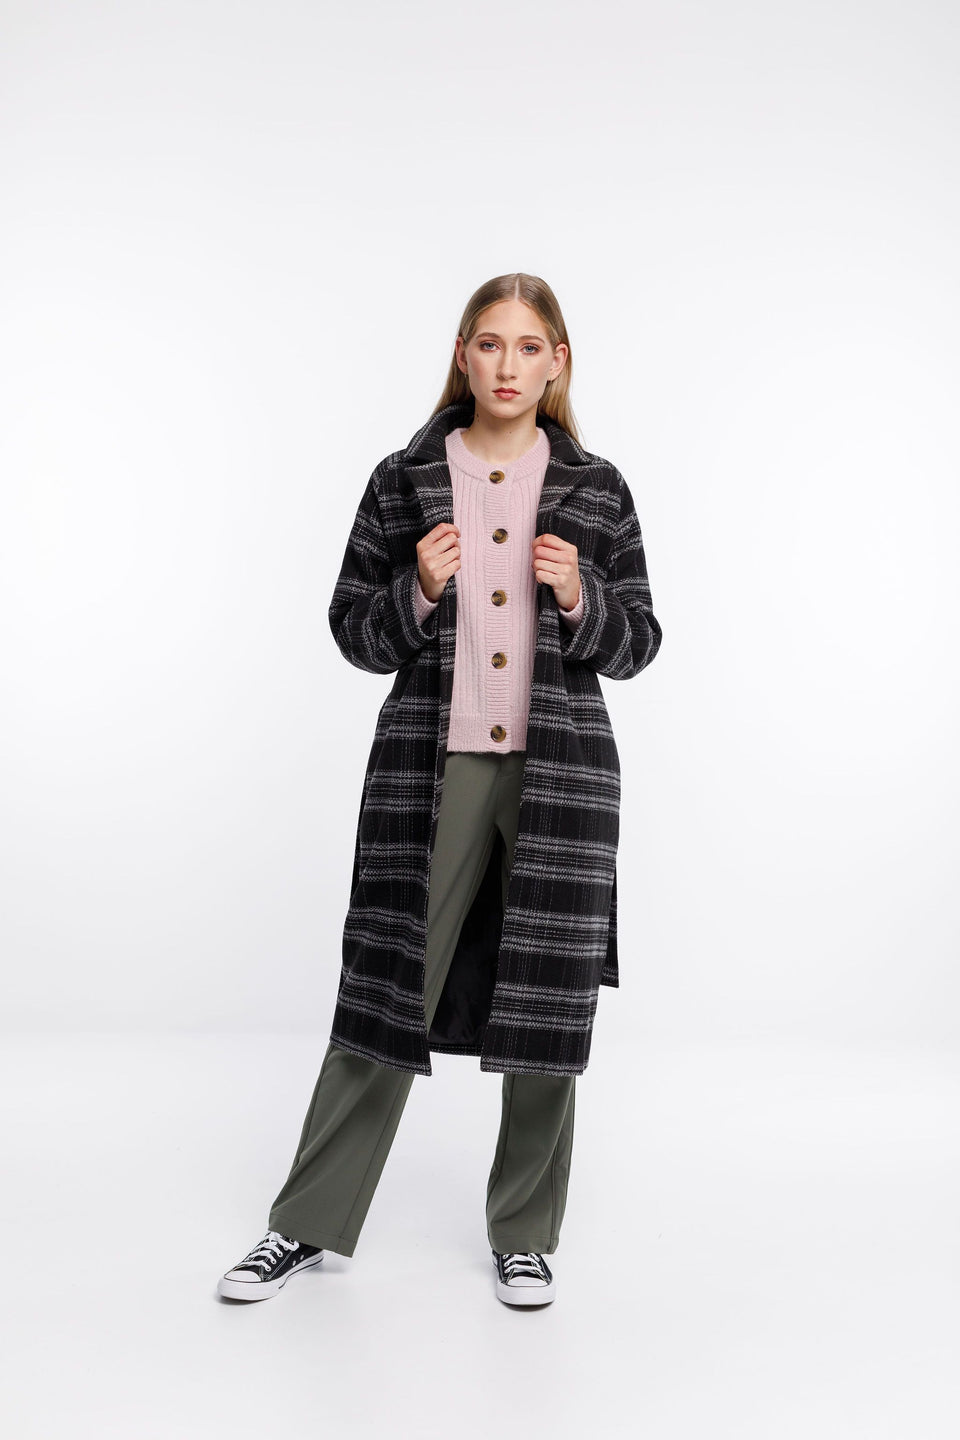 Thing Thing Clement Coat Black Check